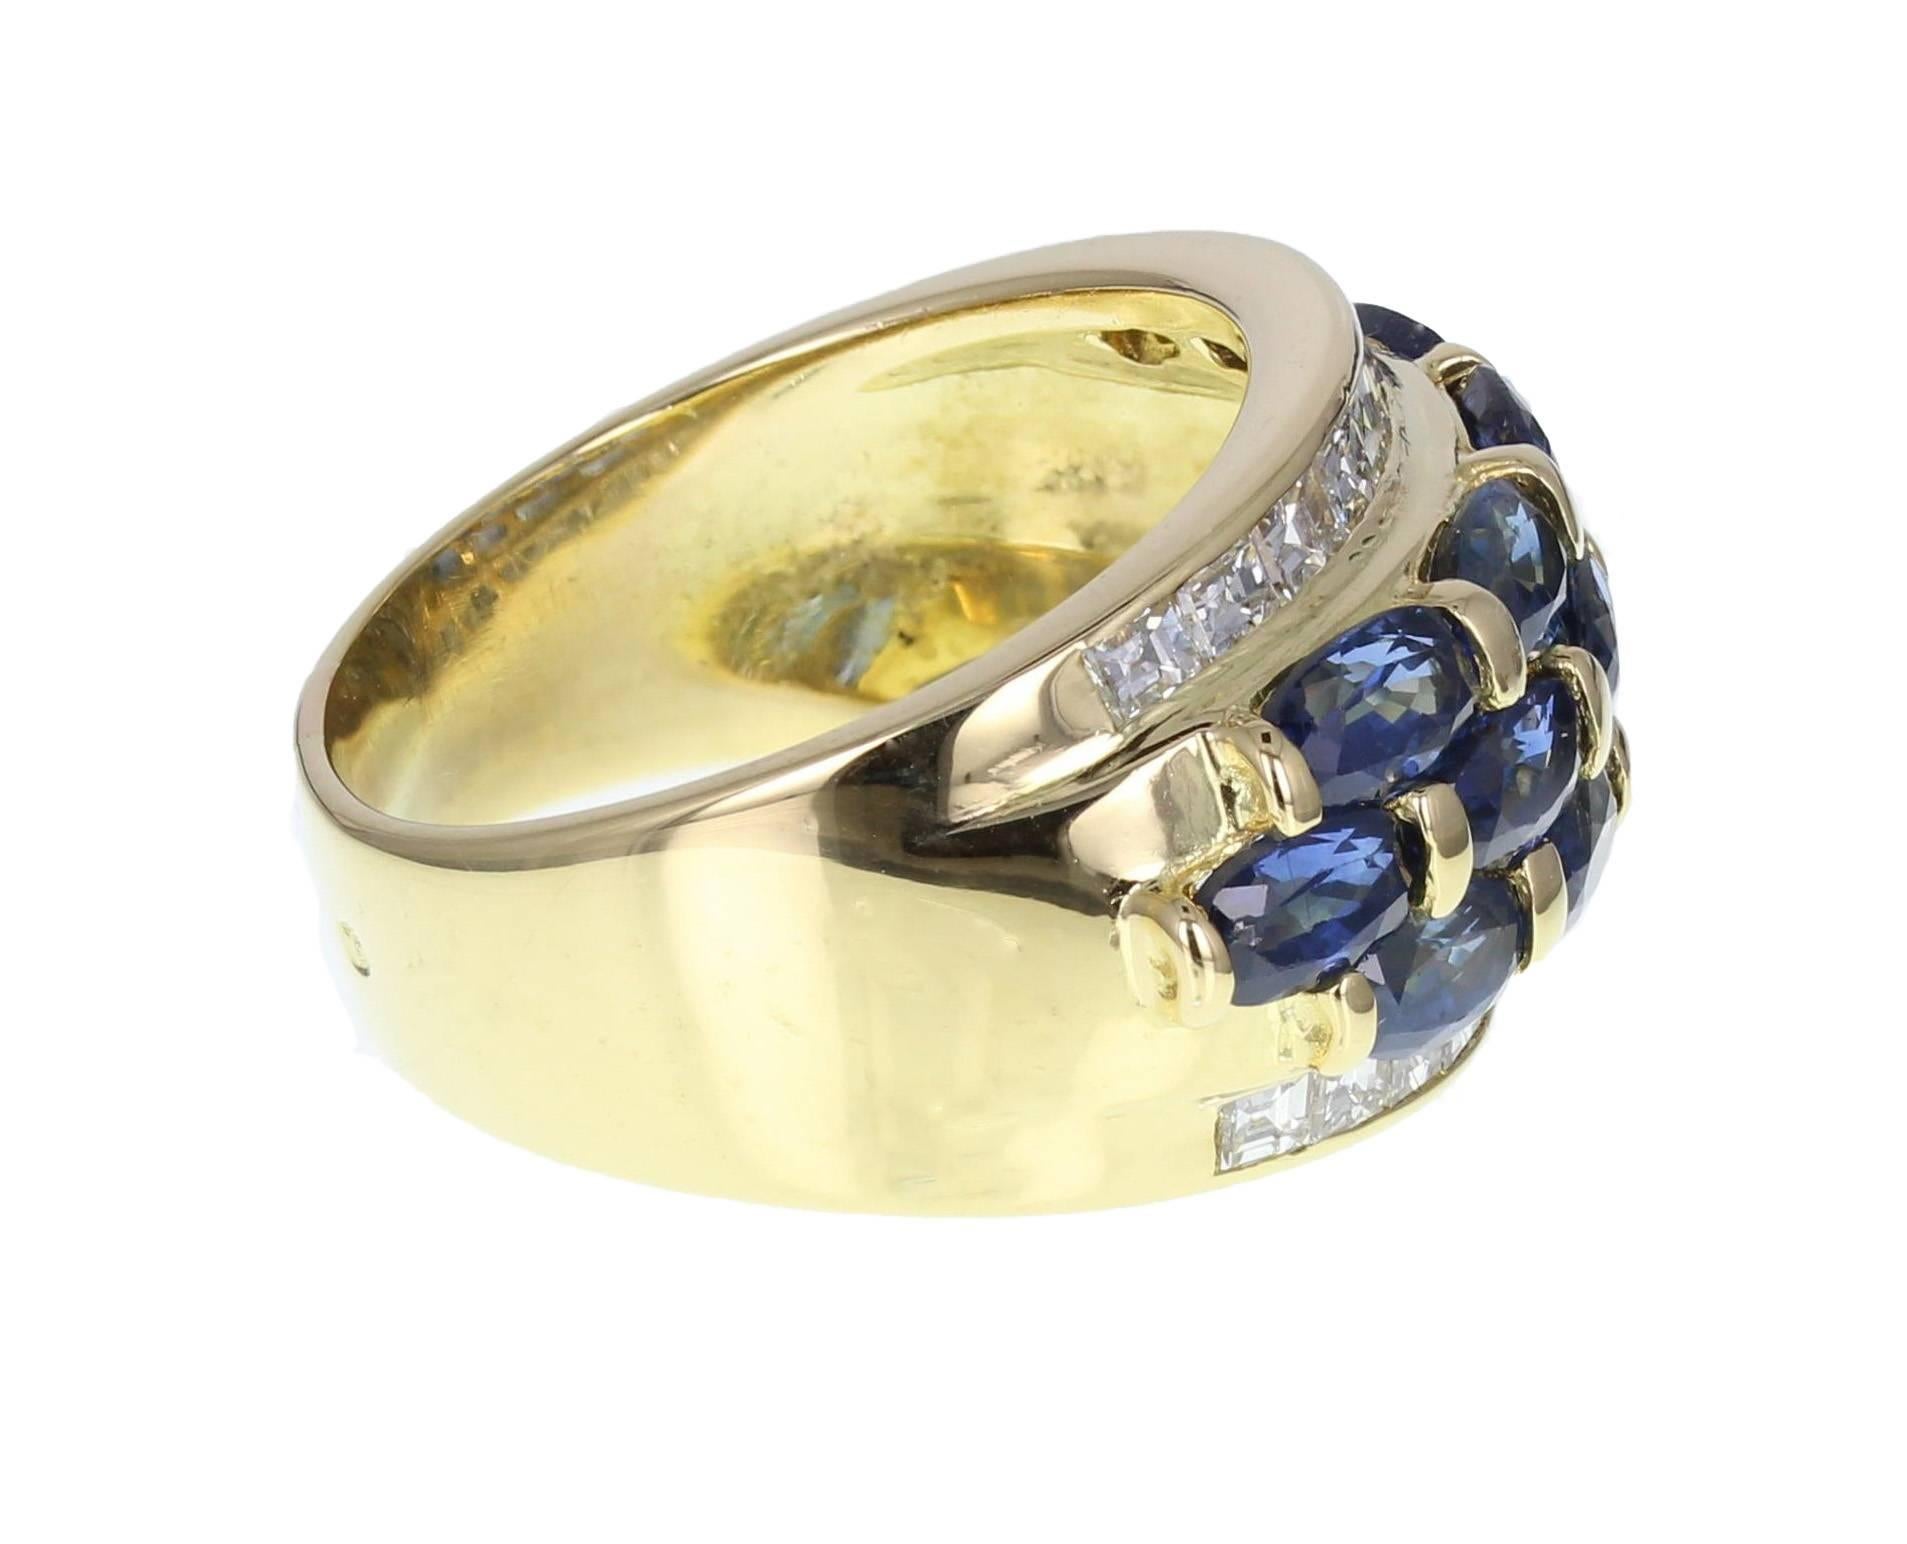 A stunning sapphire and diamond ring comprising a central section of 12 oval cut blue sapphires arranged in a brick style pattern, flanked with a channel set row of step cut diamonds. Sapphires are beautifully matched and of well saturated colour. A